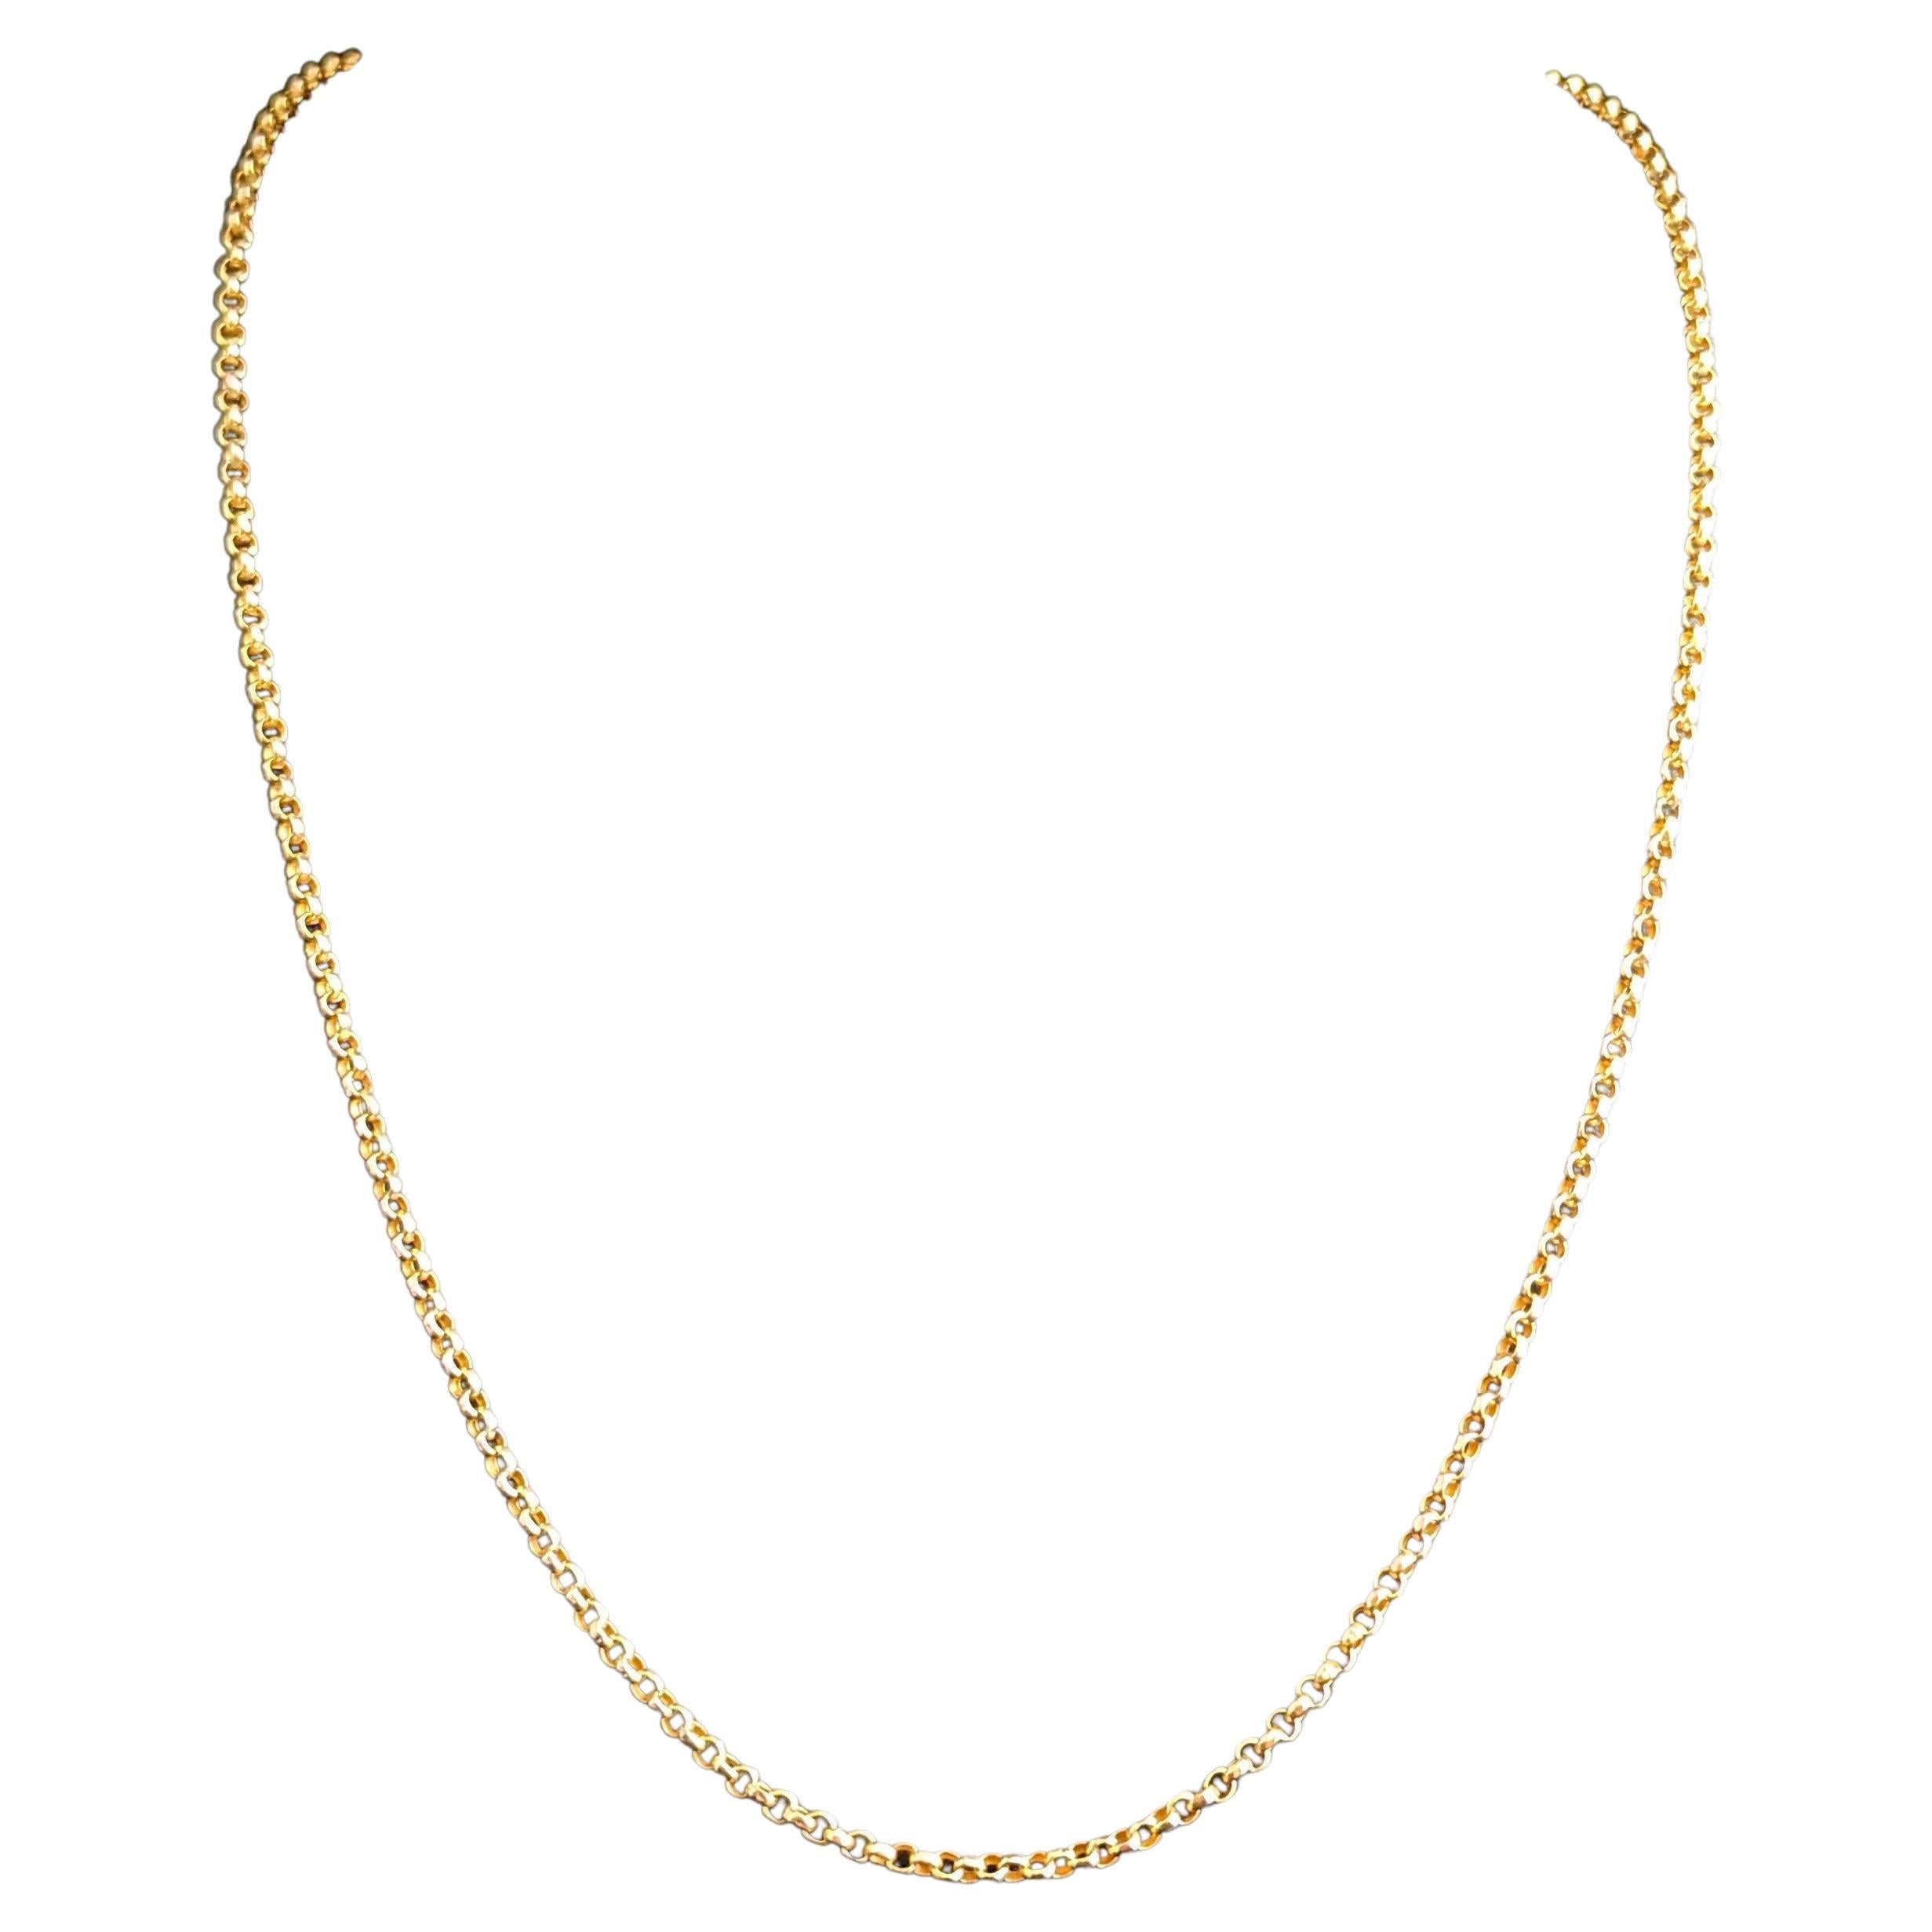 Antique 9k yellow gold Belcher link chain necklace, Edwardian  For Sale